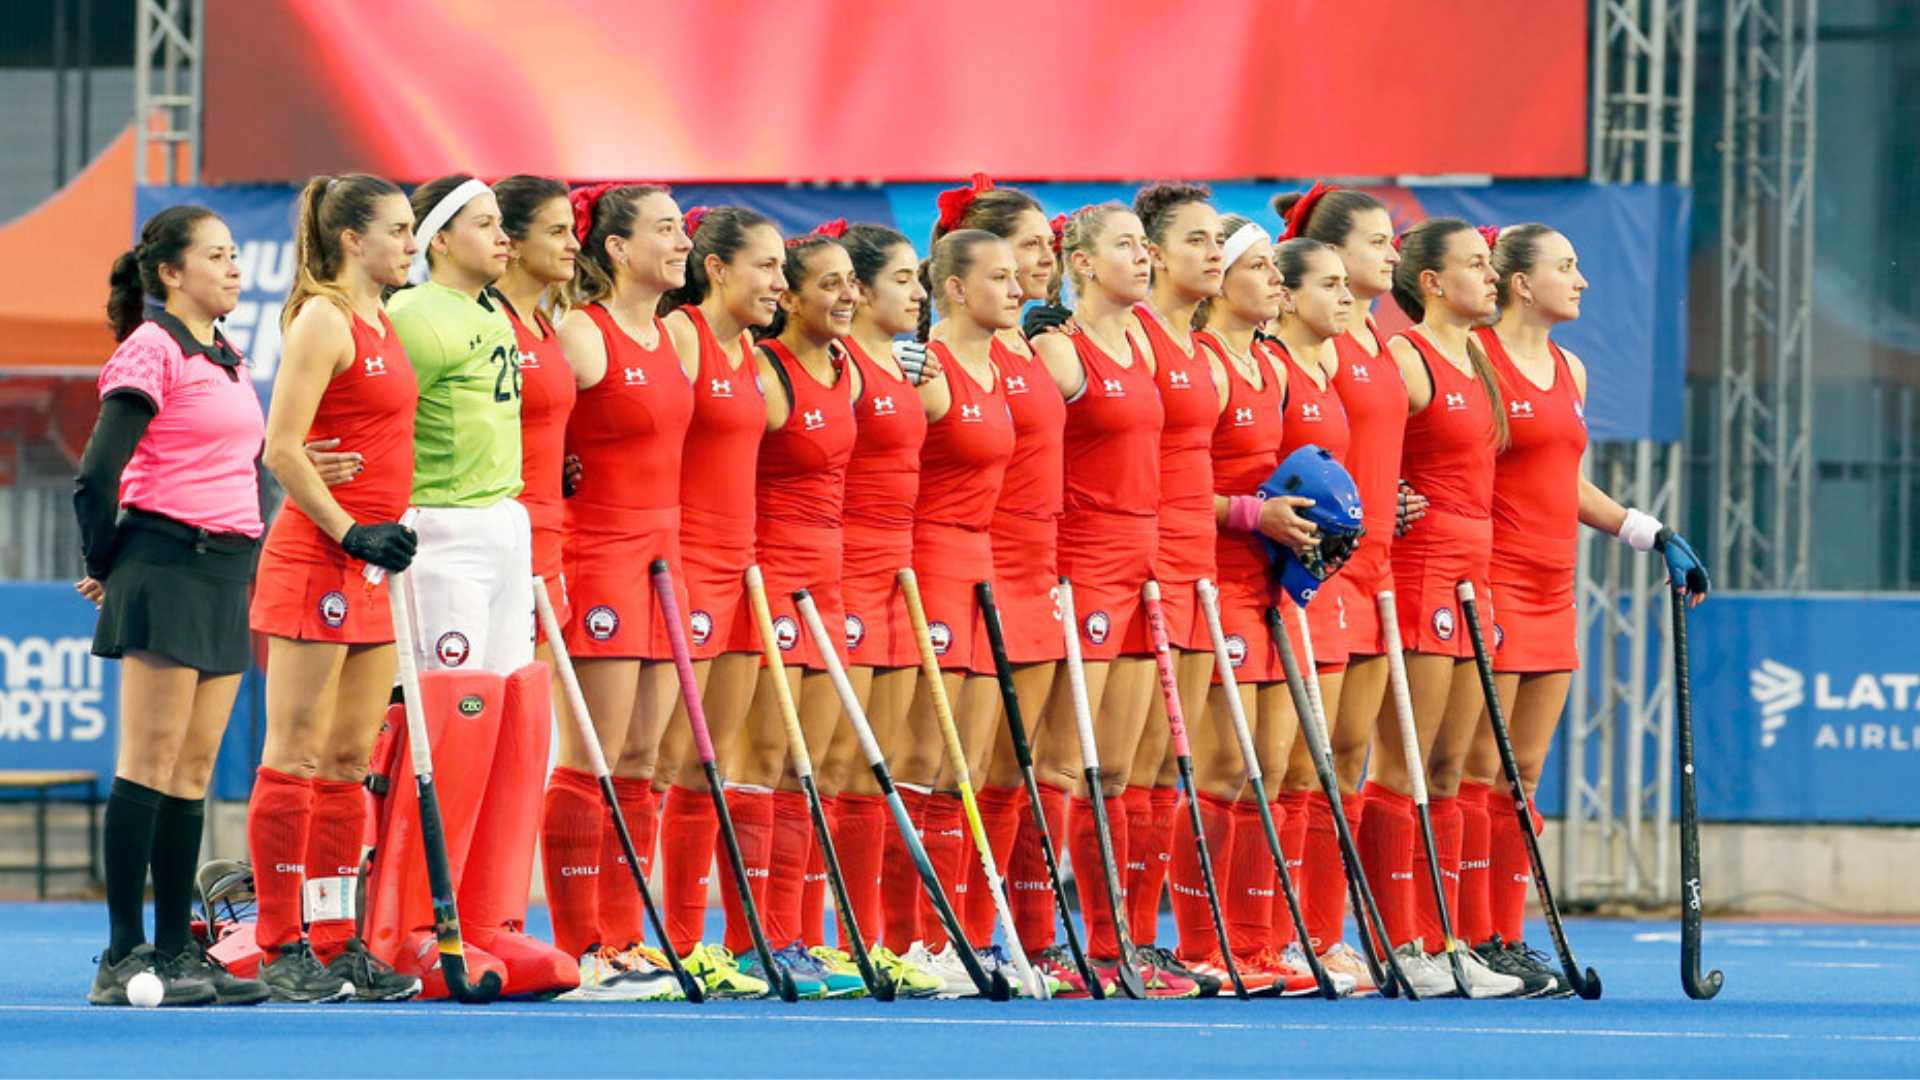 Welcome to the Chilean Field Hockey Federation 🏑🇨🇱 and Las